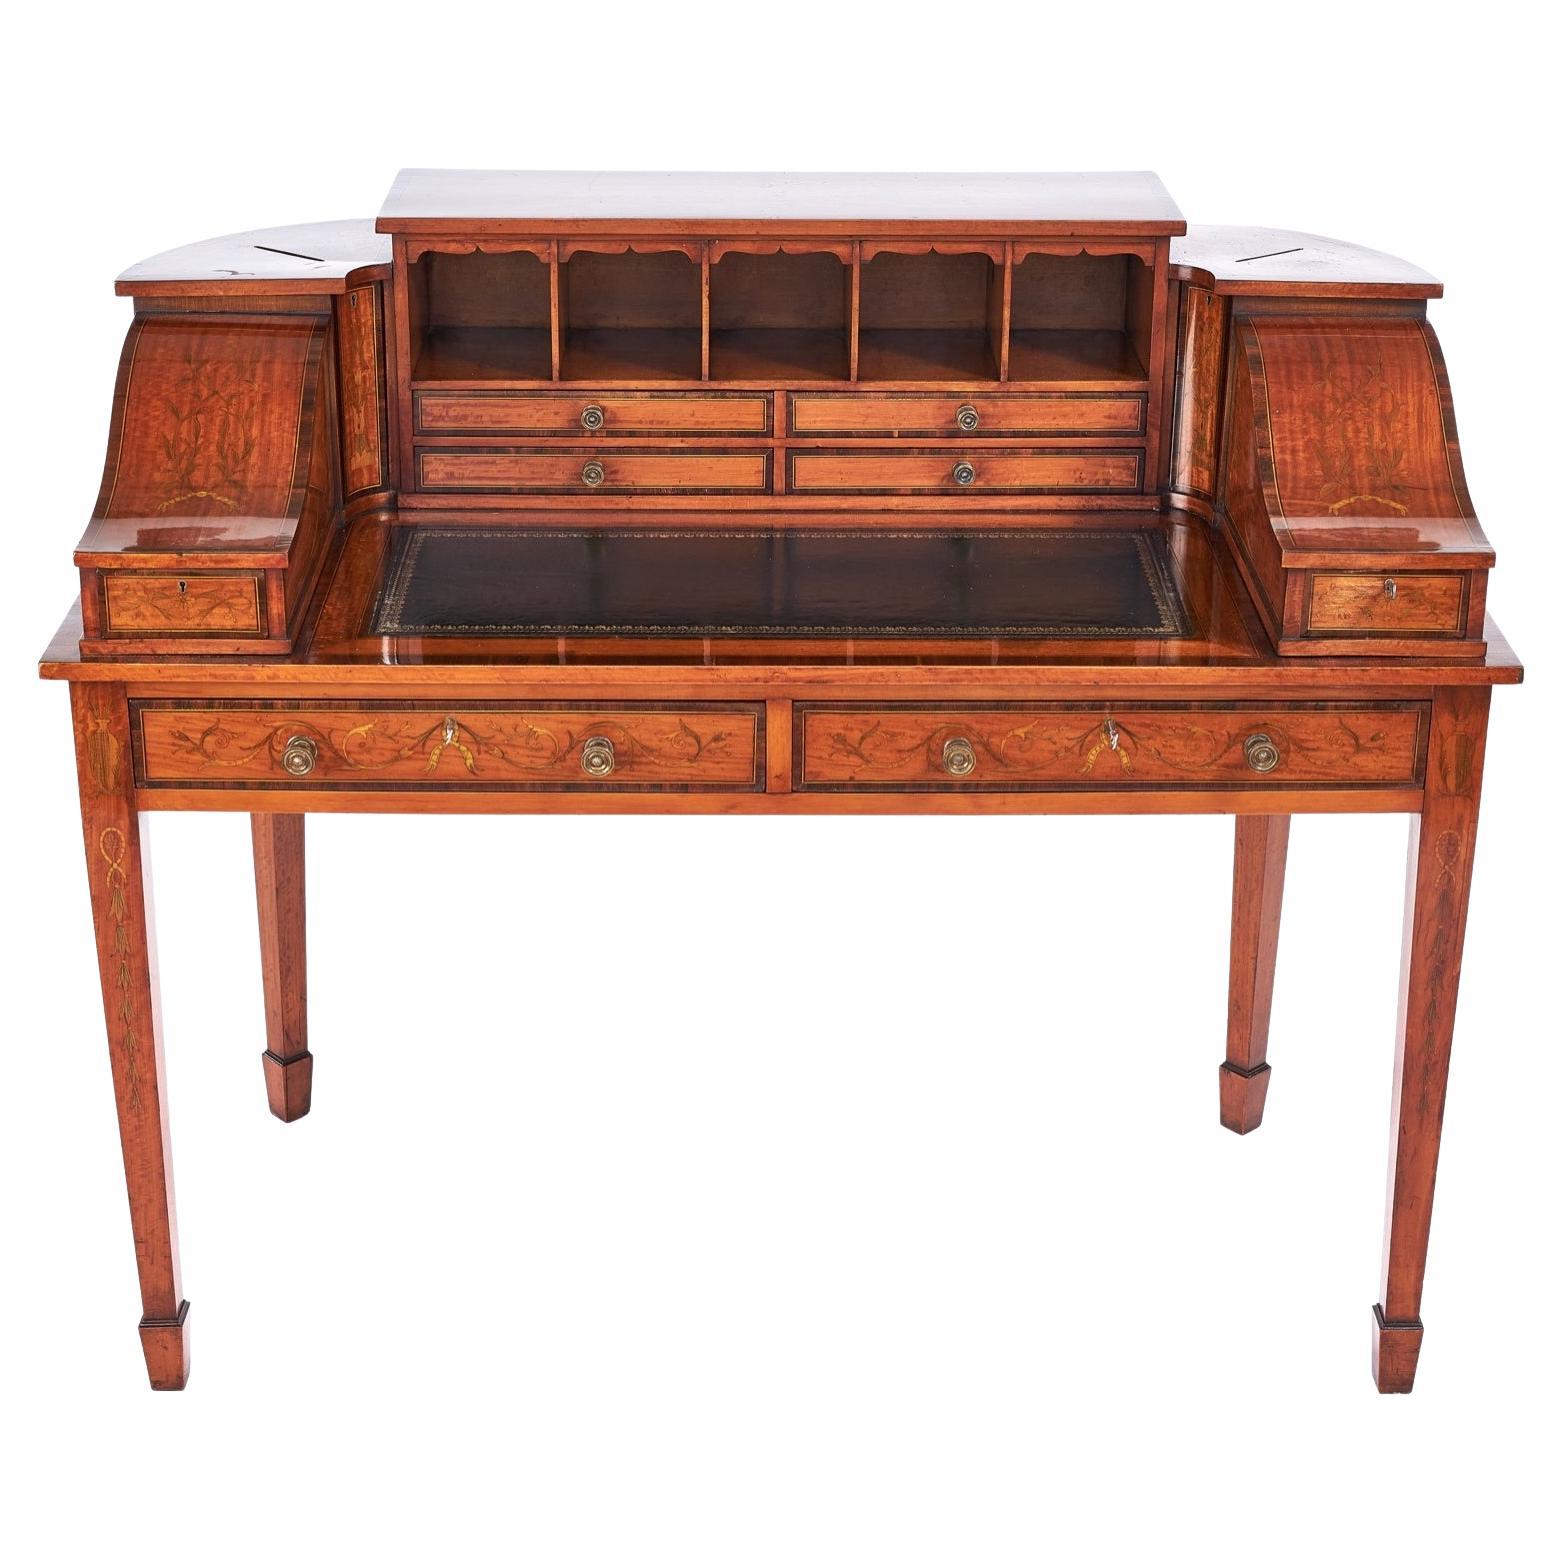 Fine Sheraton Revival Satinwood Inlaid Carlton House Desk. with Letter Boxes, Ci For Sale